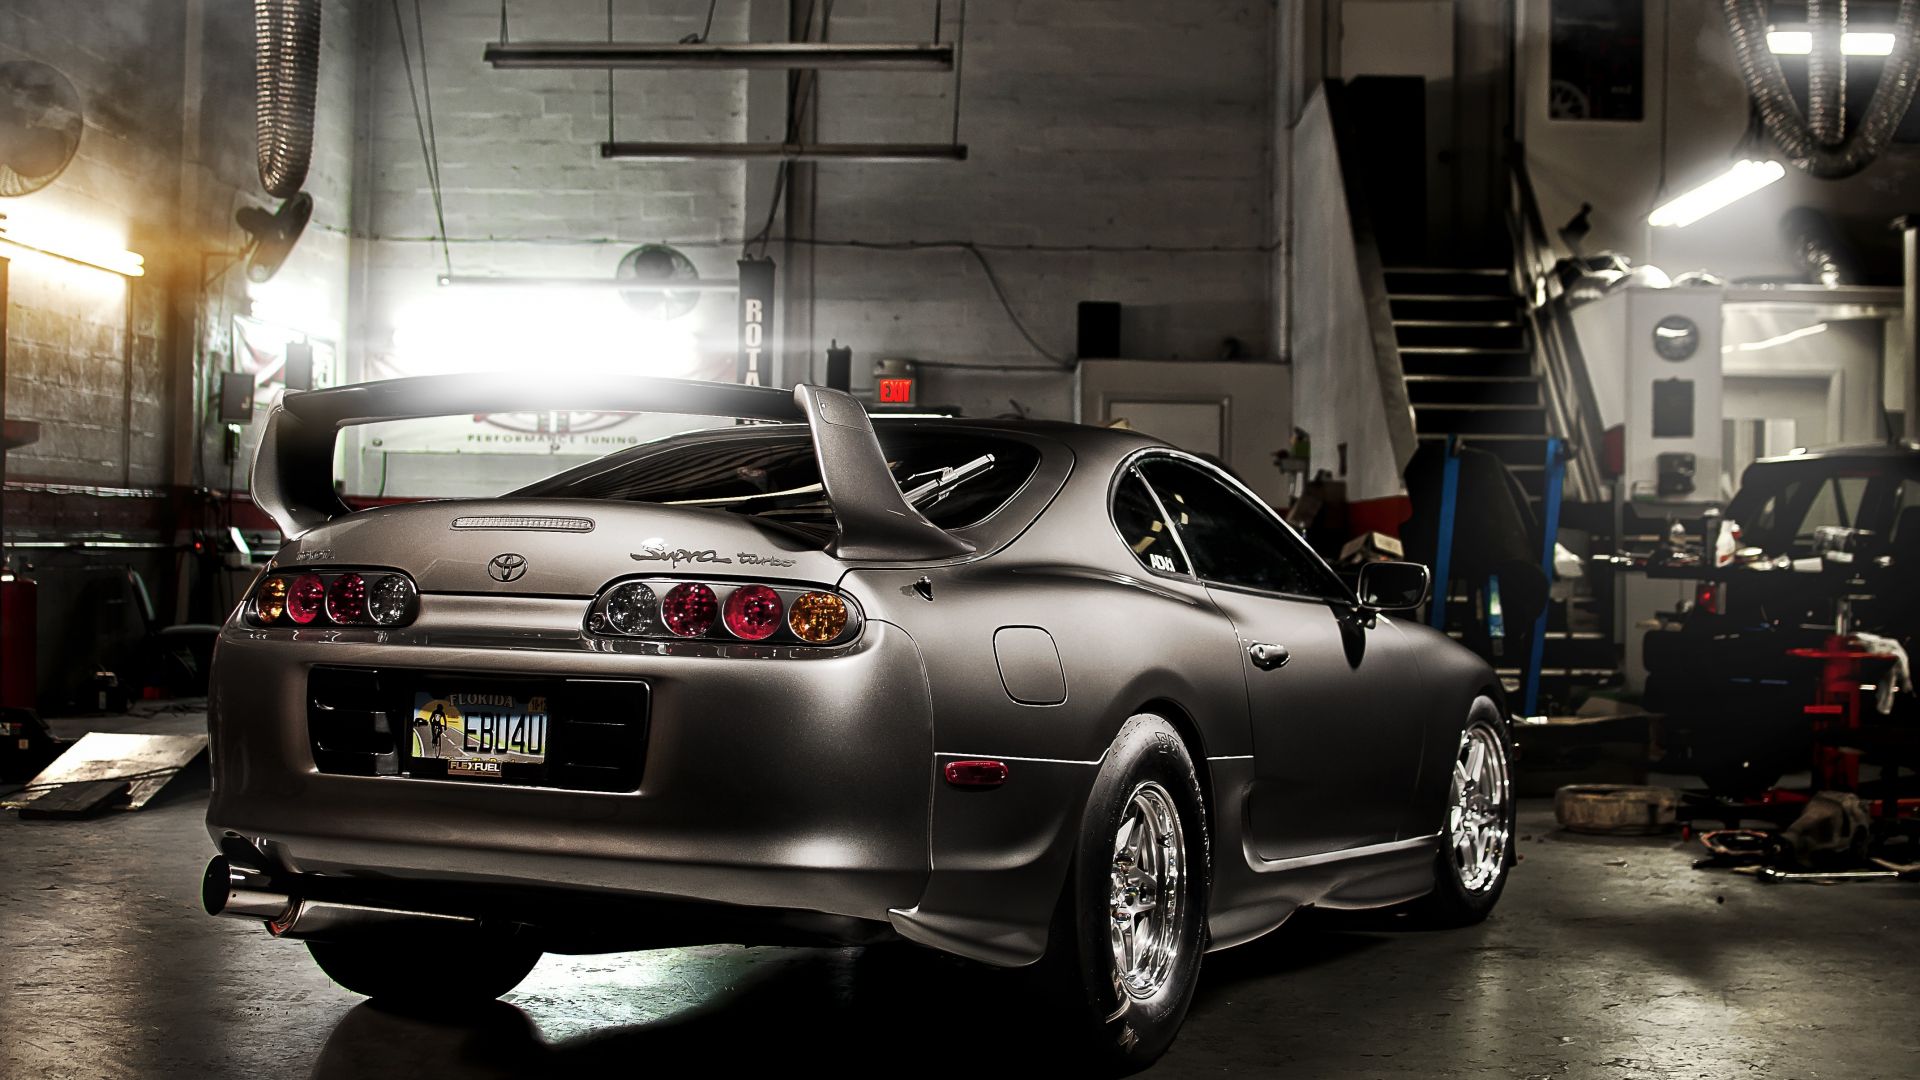 Rear view, garage, toyota supra wallpaper, HD image, picture, background, a8ac4d